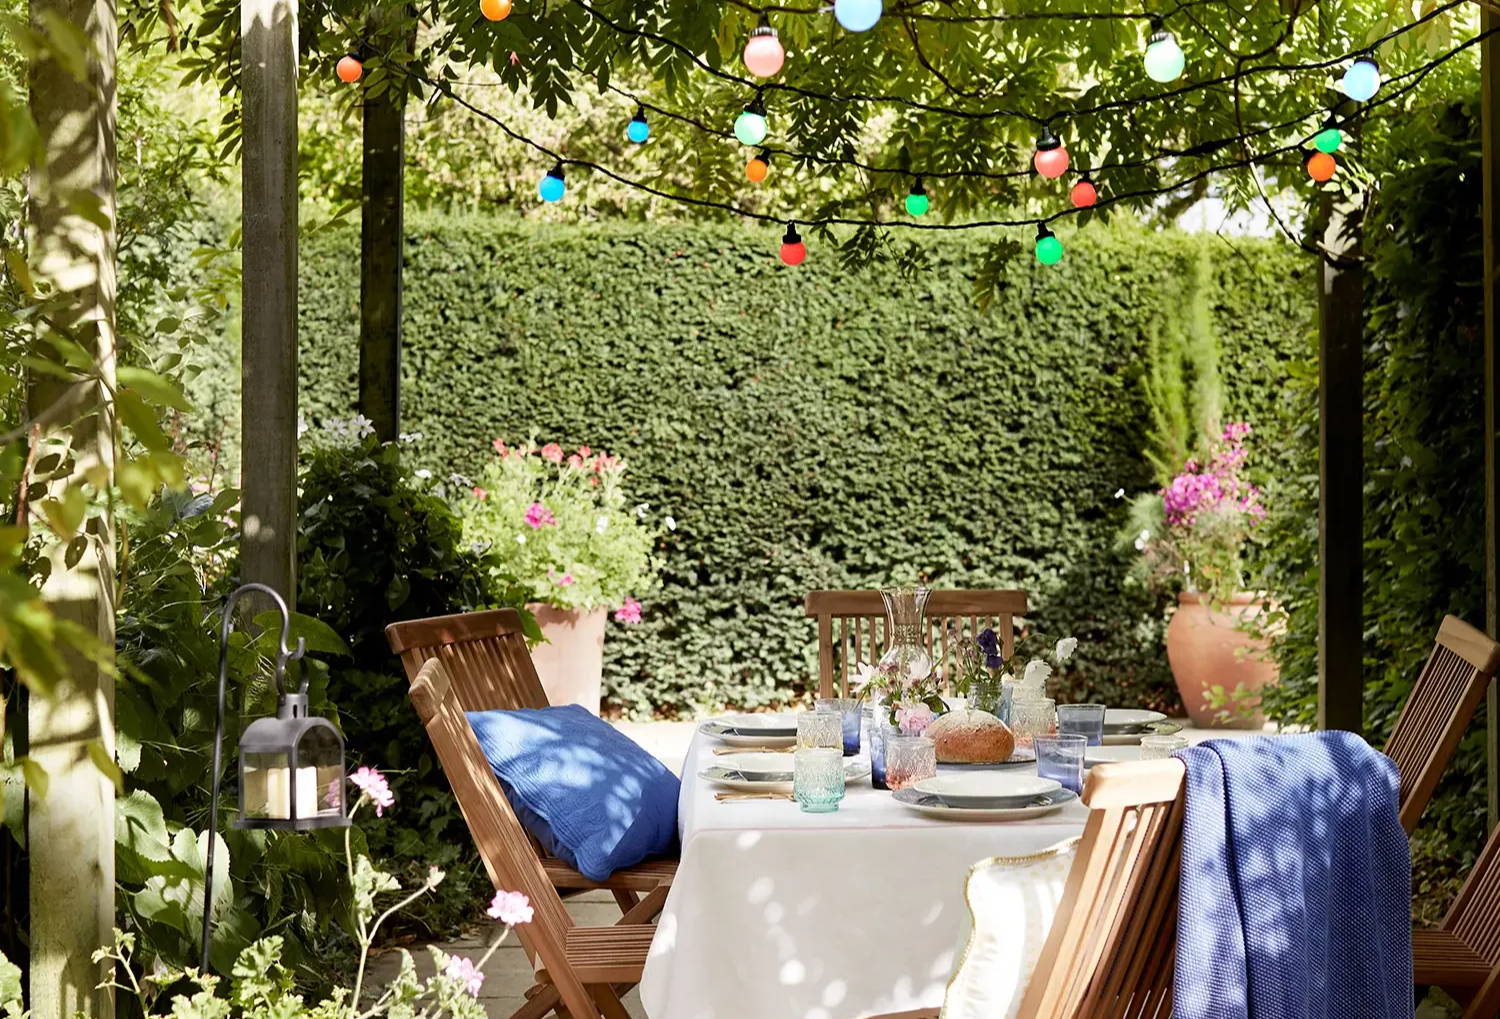 Multi coloured festoons over an outdoor dining area.